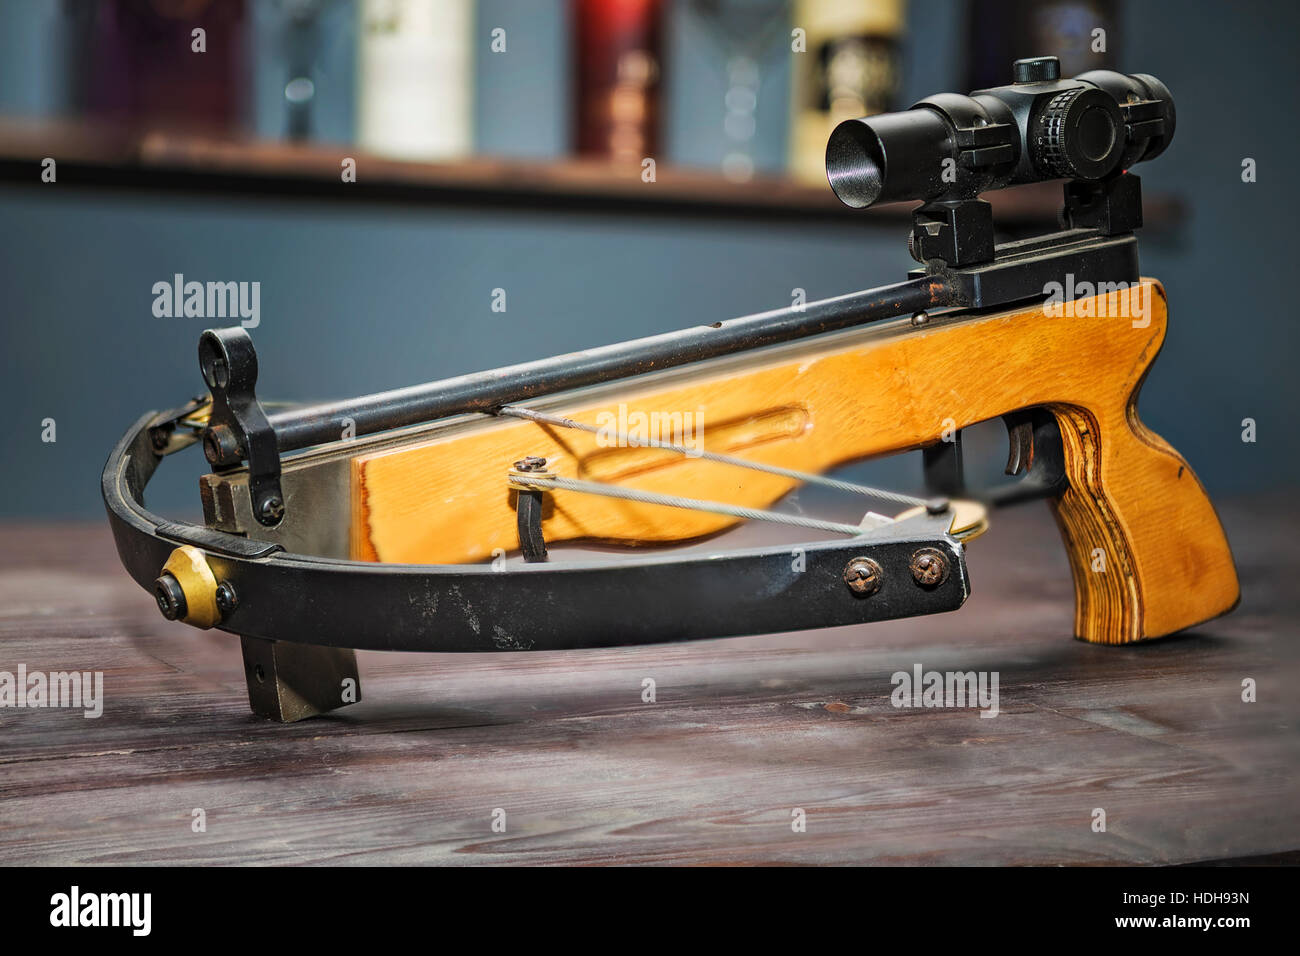 Crossbow, weapons producing boom. Stock Photo